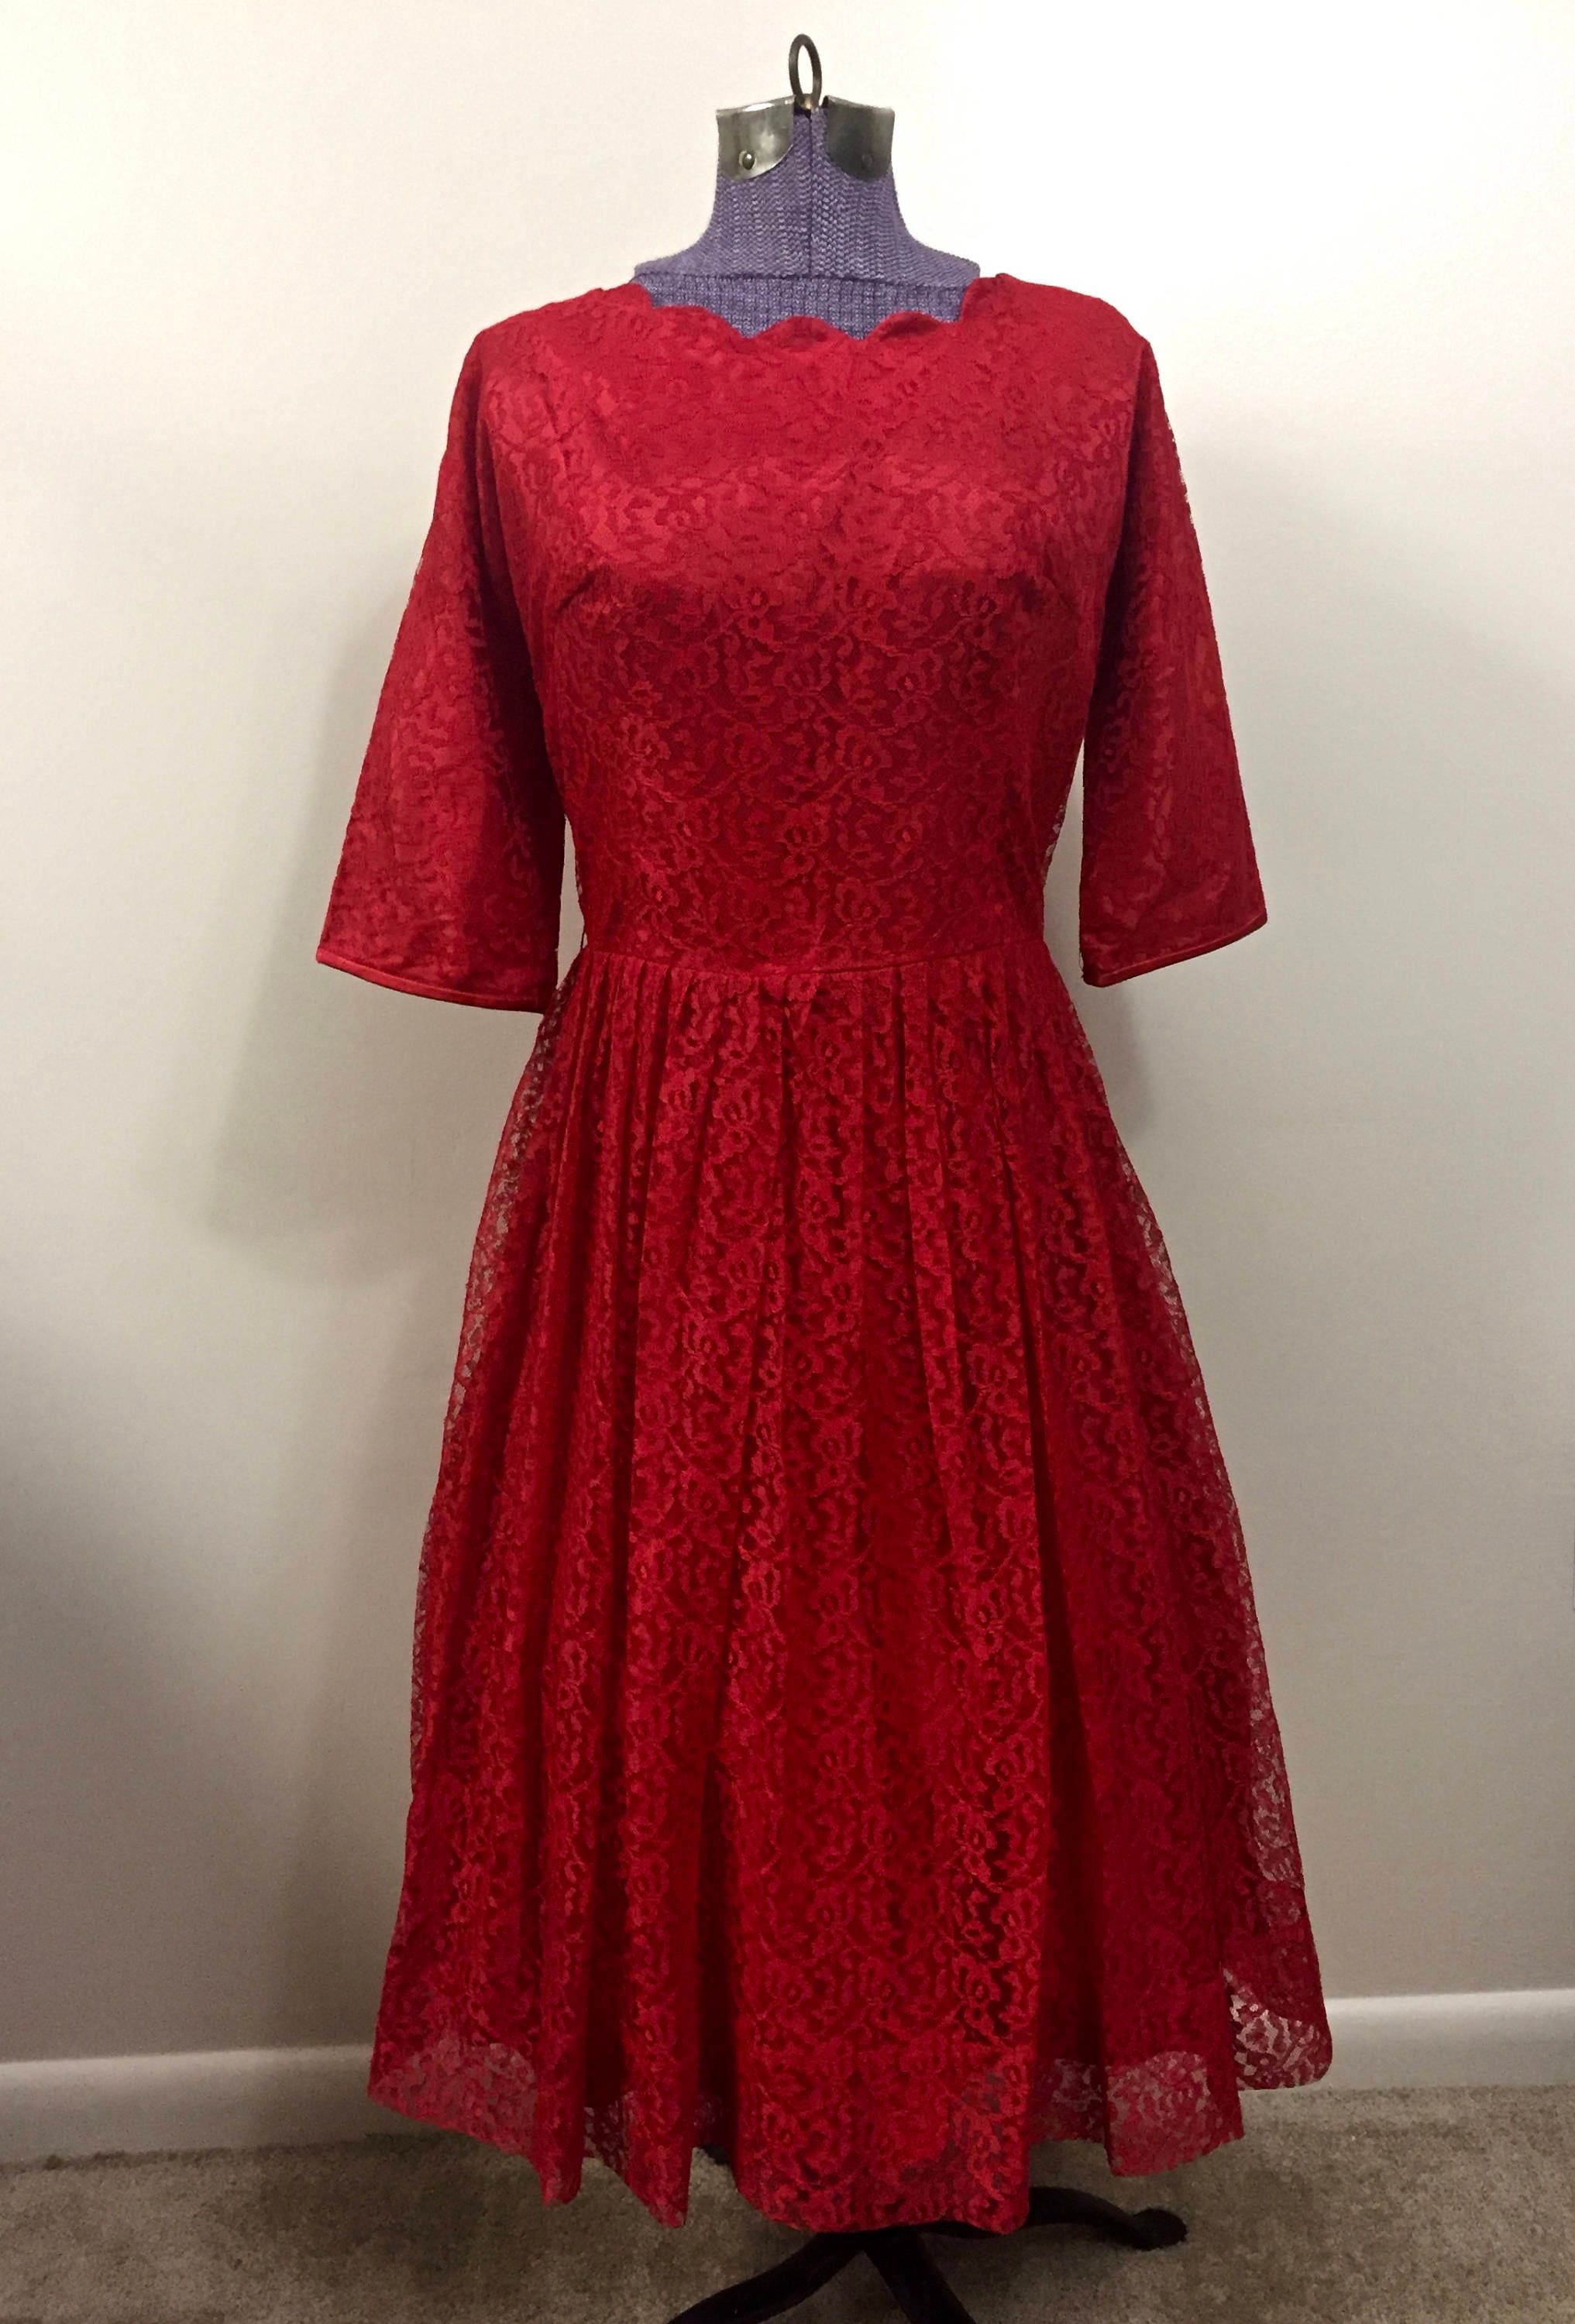 Vintage 1950s Red Lace Cocktail Dress Valentines Day - Etsy